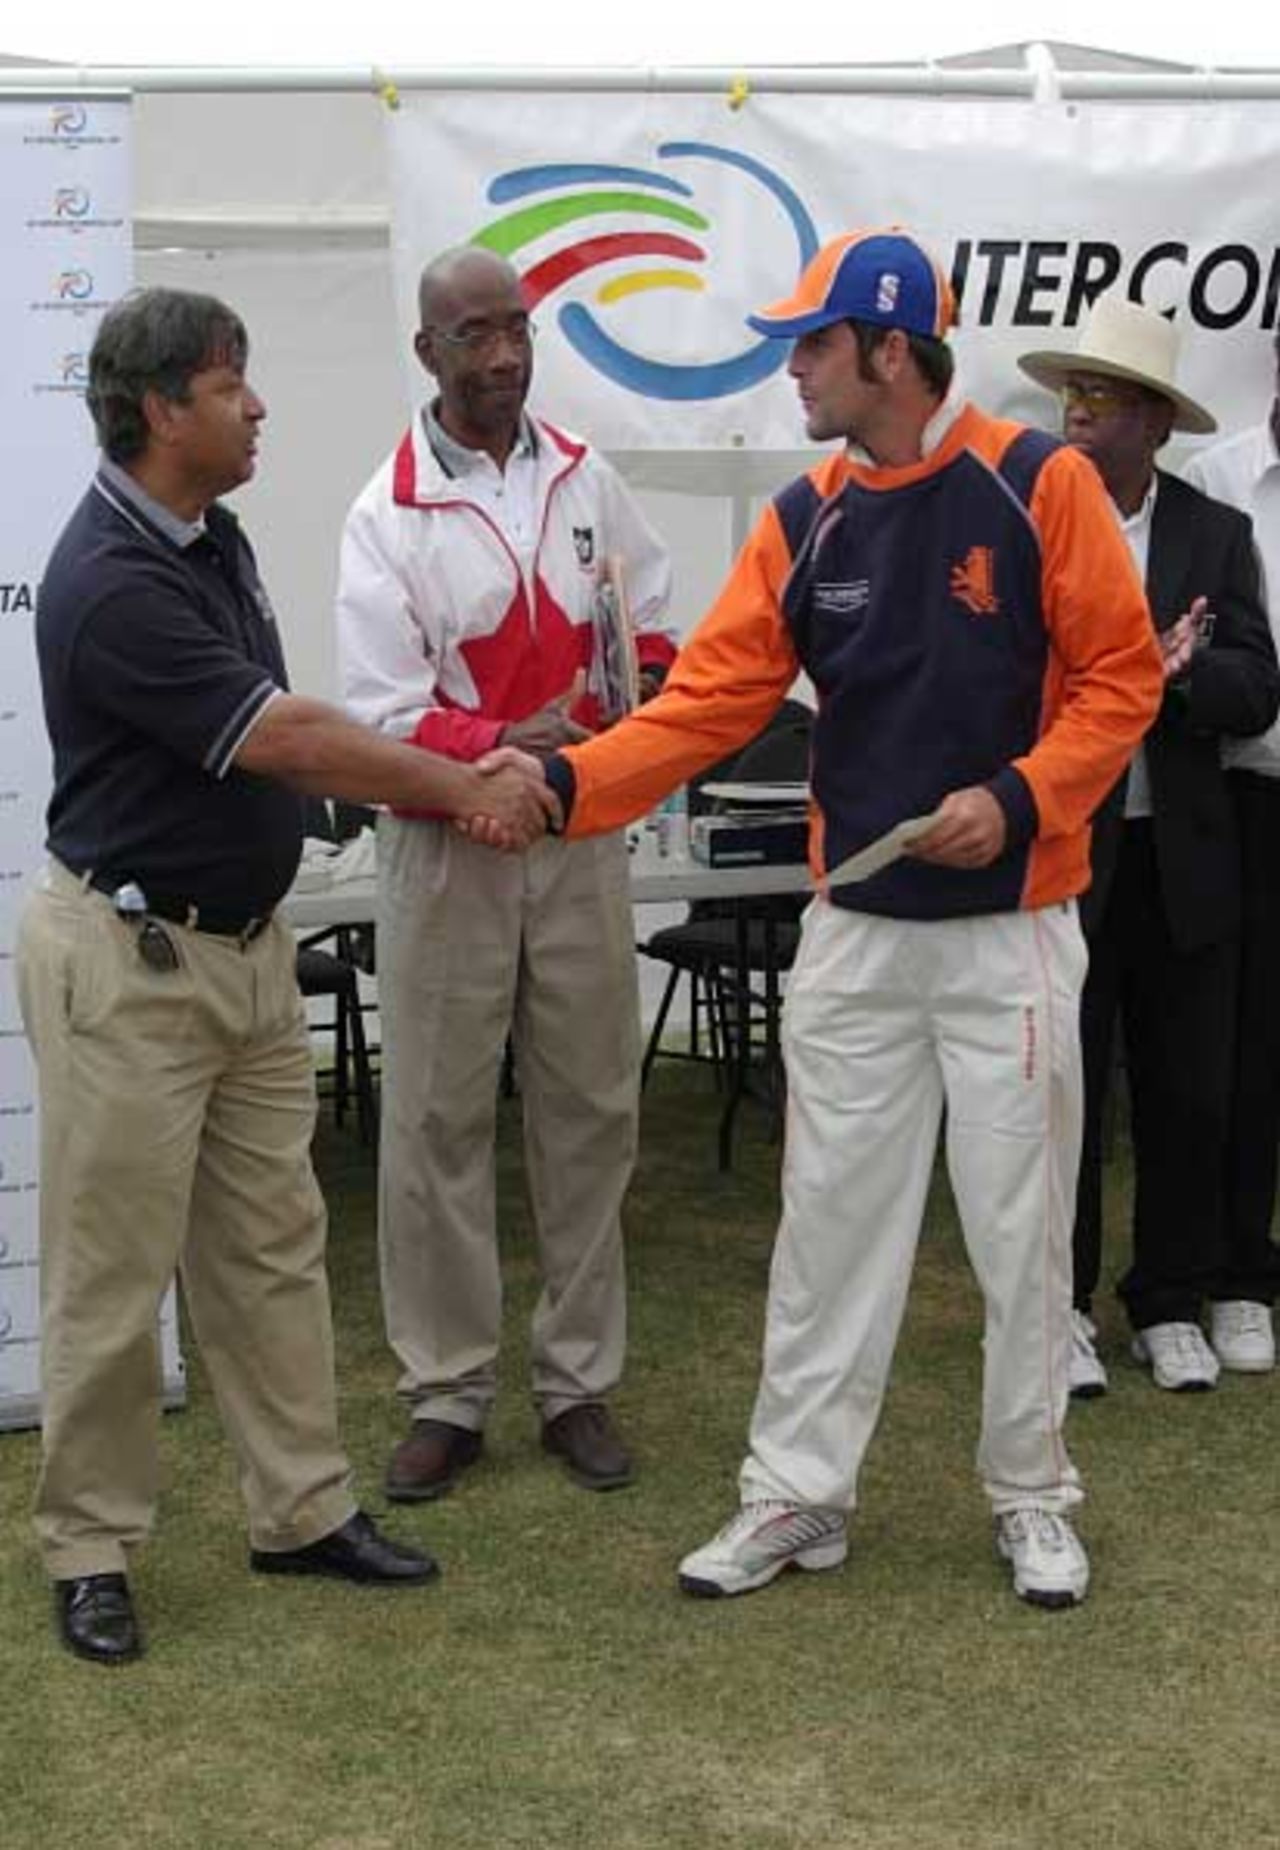 Peter Borren collects his Man-of-the-Match award, Canada v Netherlands, Intercontinental Cup, Toronto, July 1, 2007